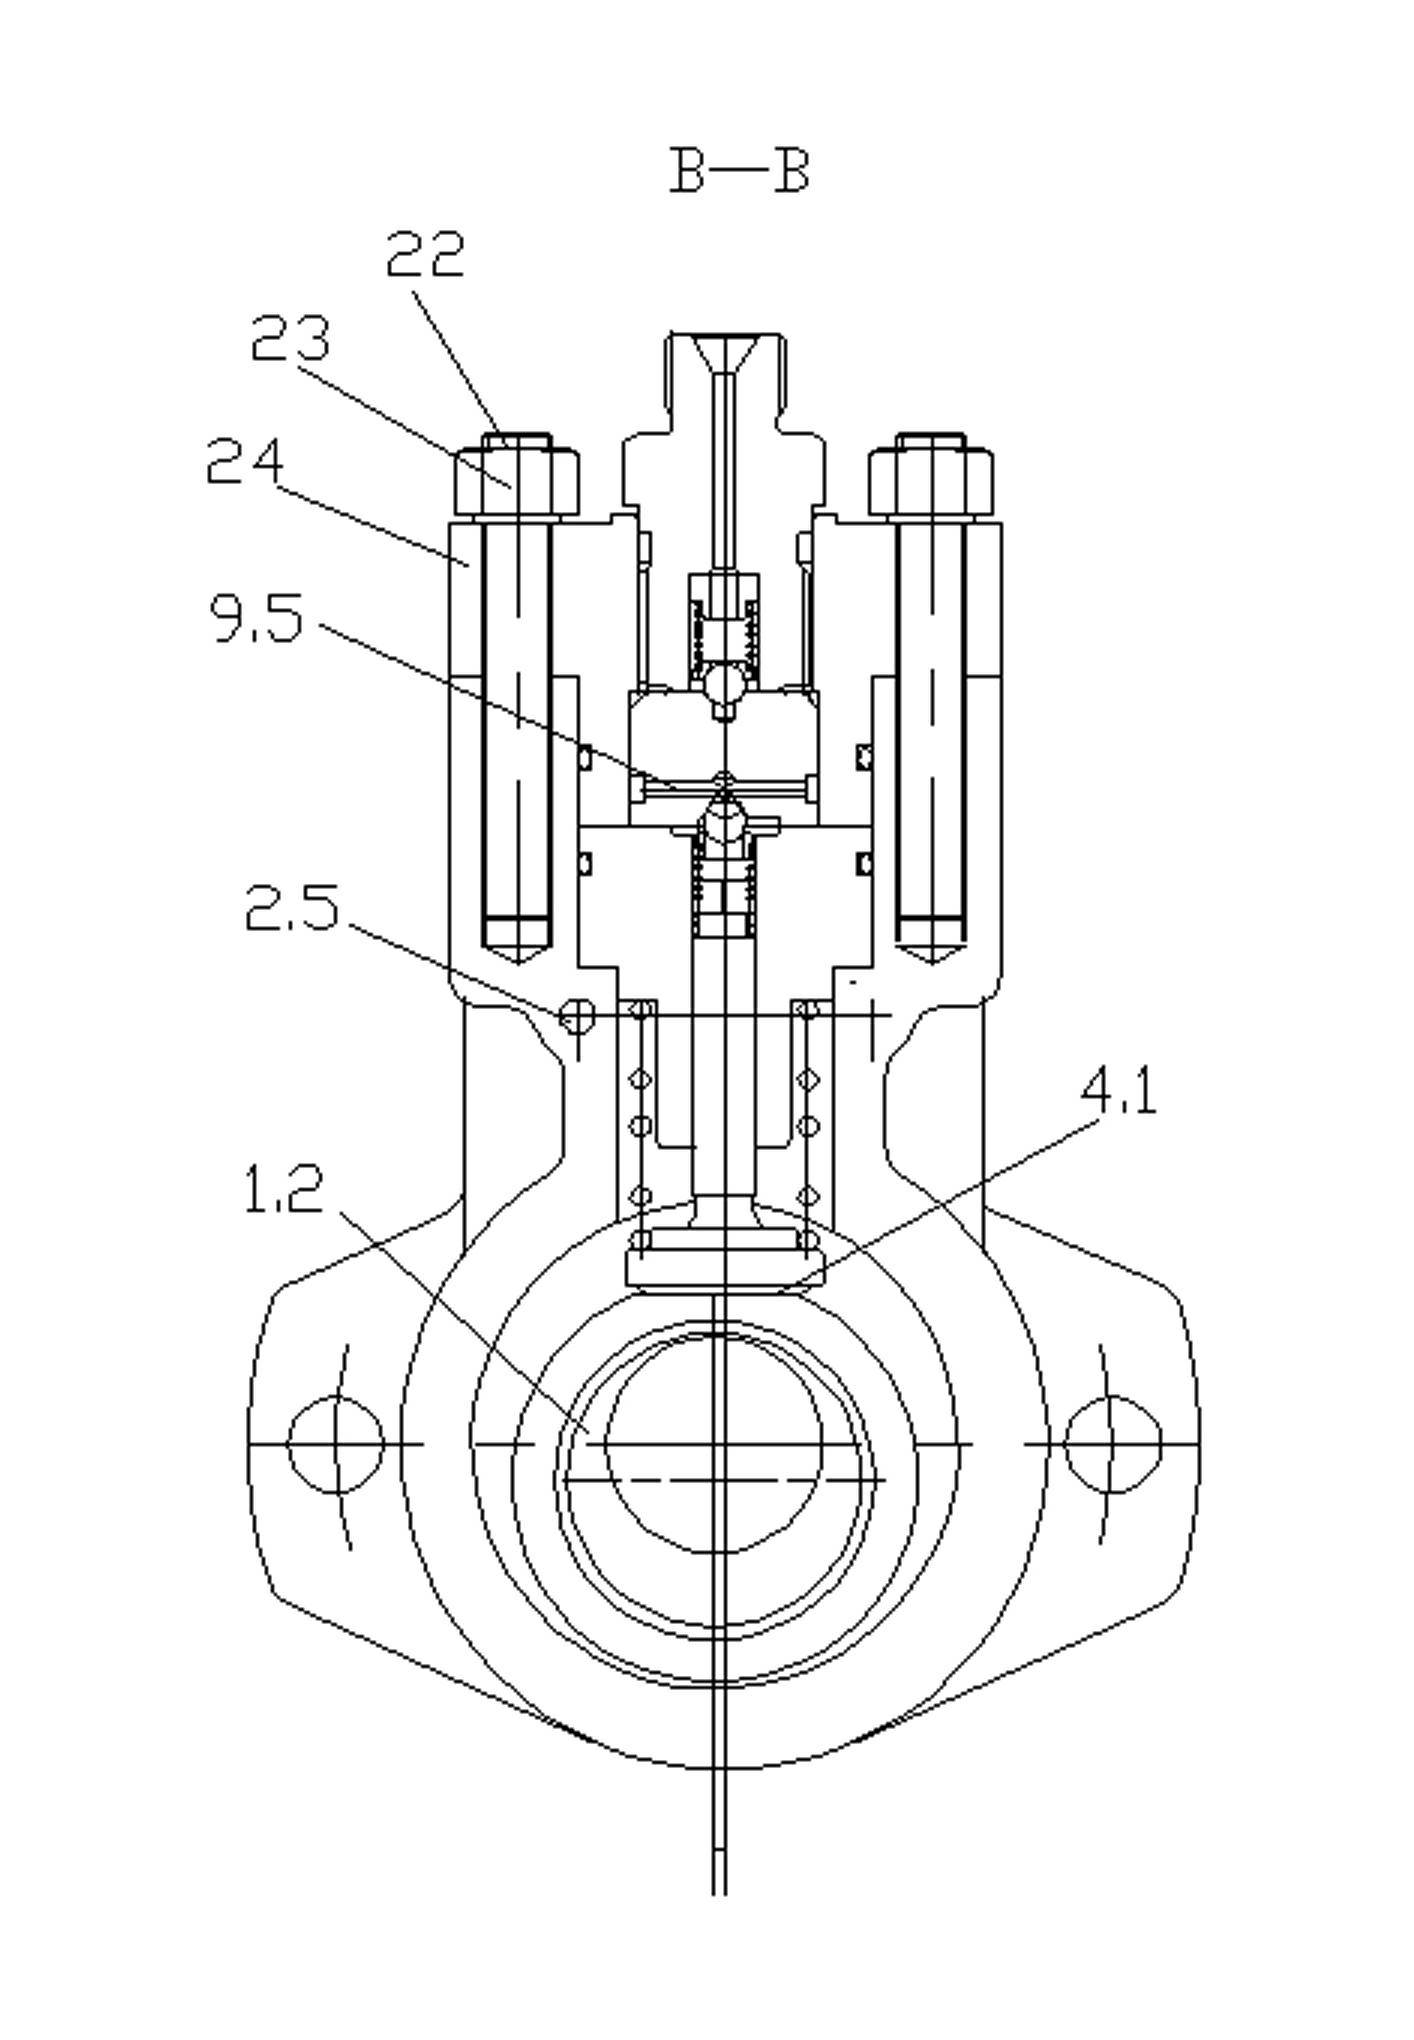 In-line type fuel feed pump of high-pressure common rail system